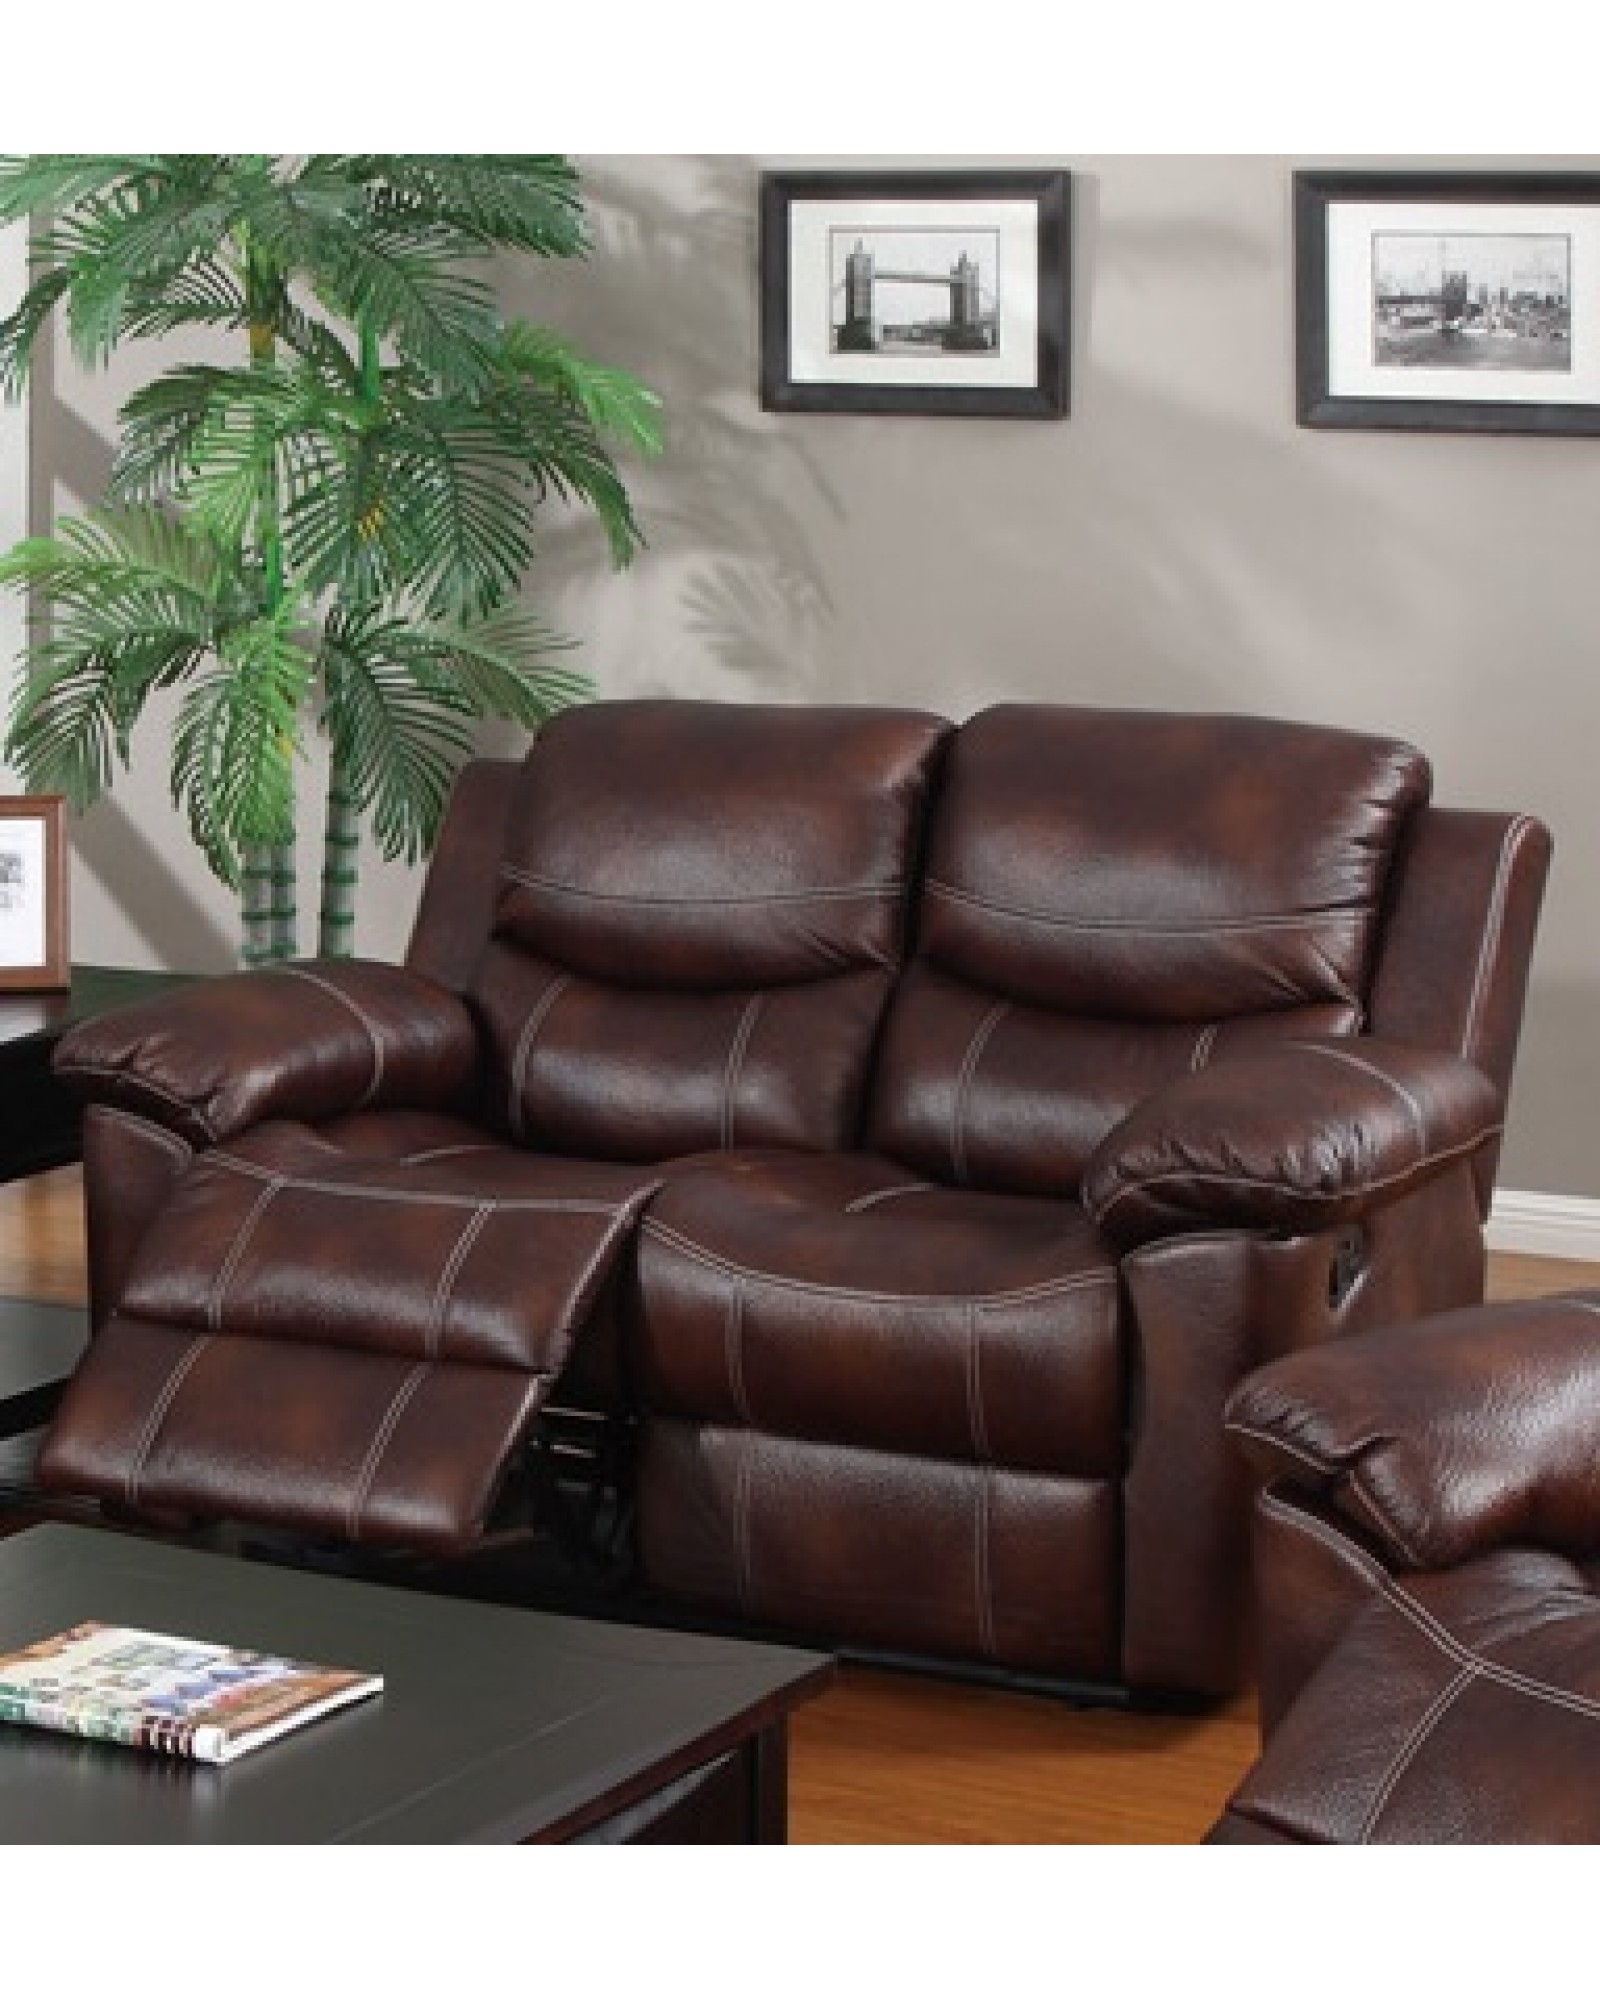 Padded Leatherette Motion Sofa, Loveseat and Recliner, Espresso